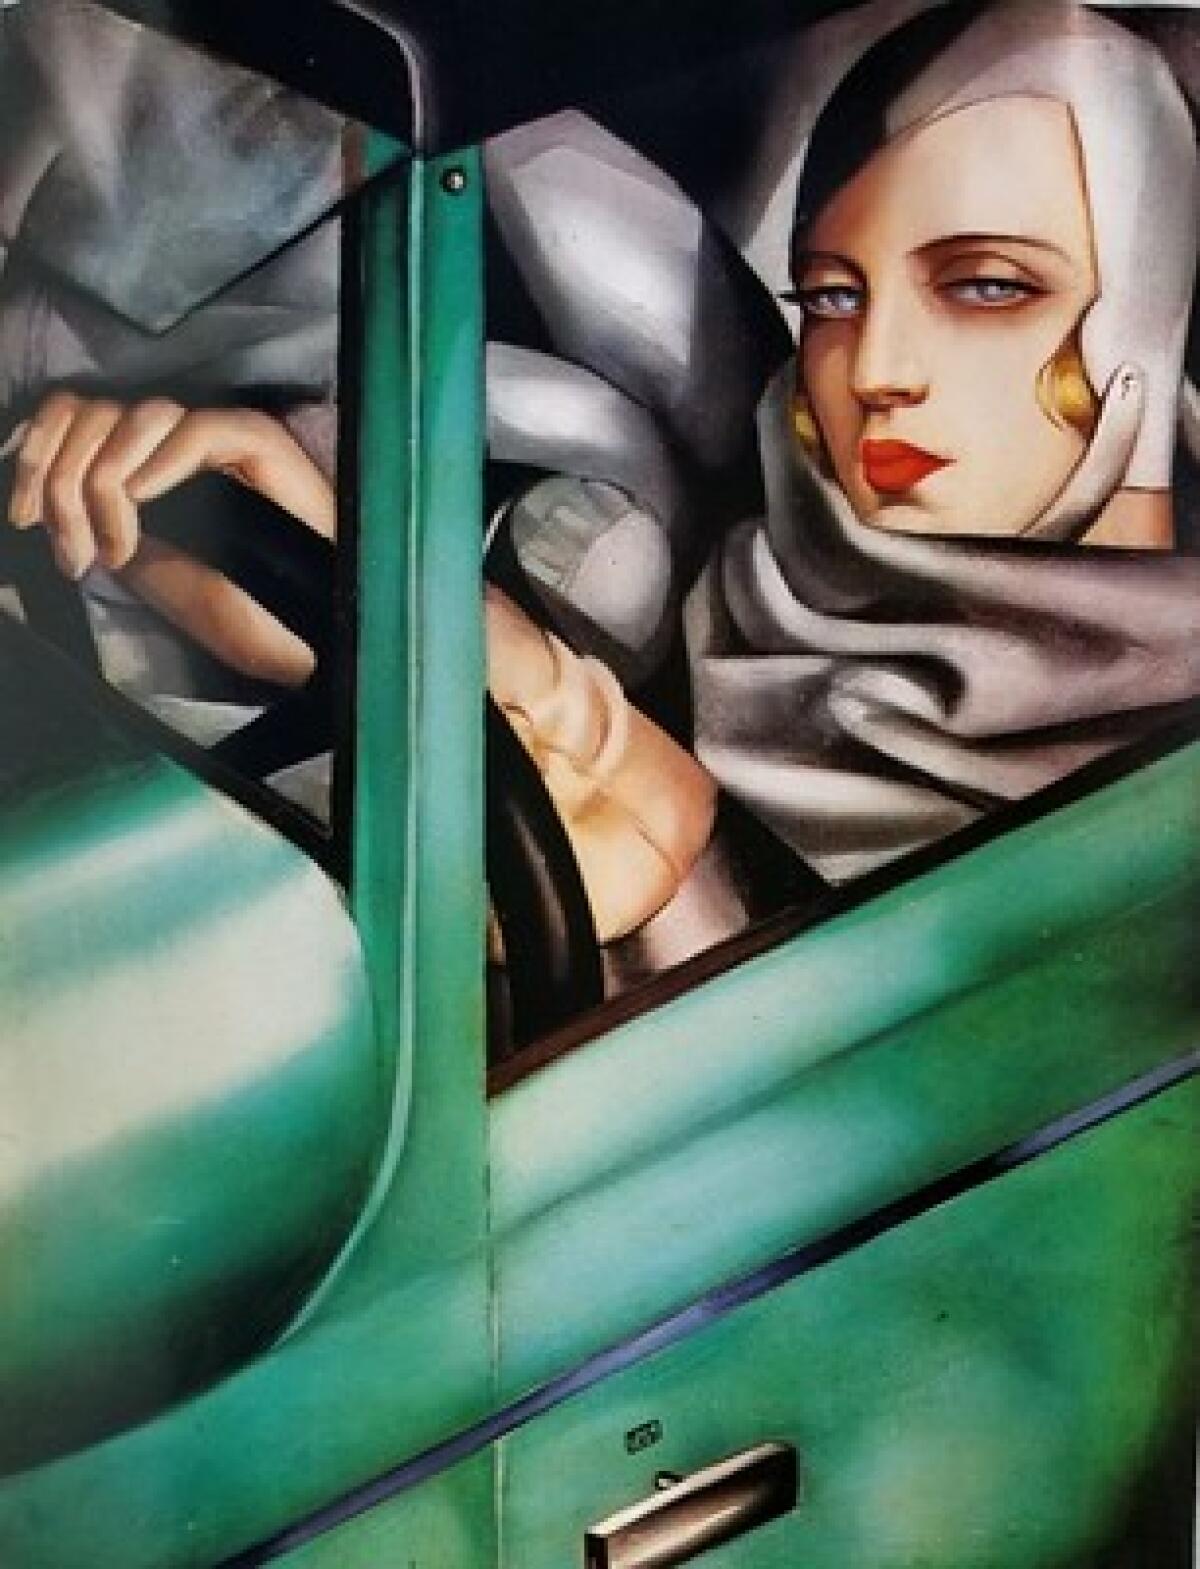 A painting of a woman driving a green classic car